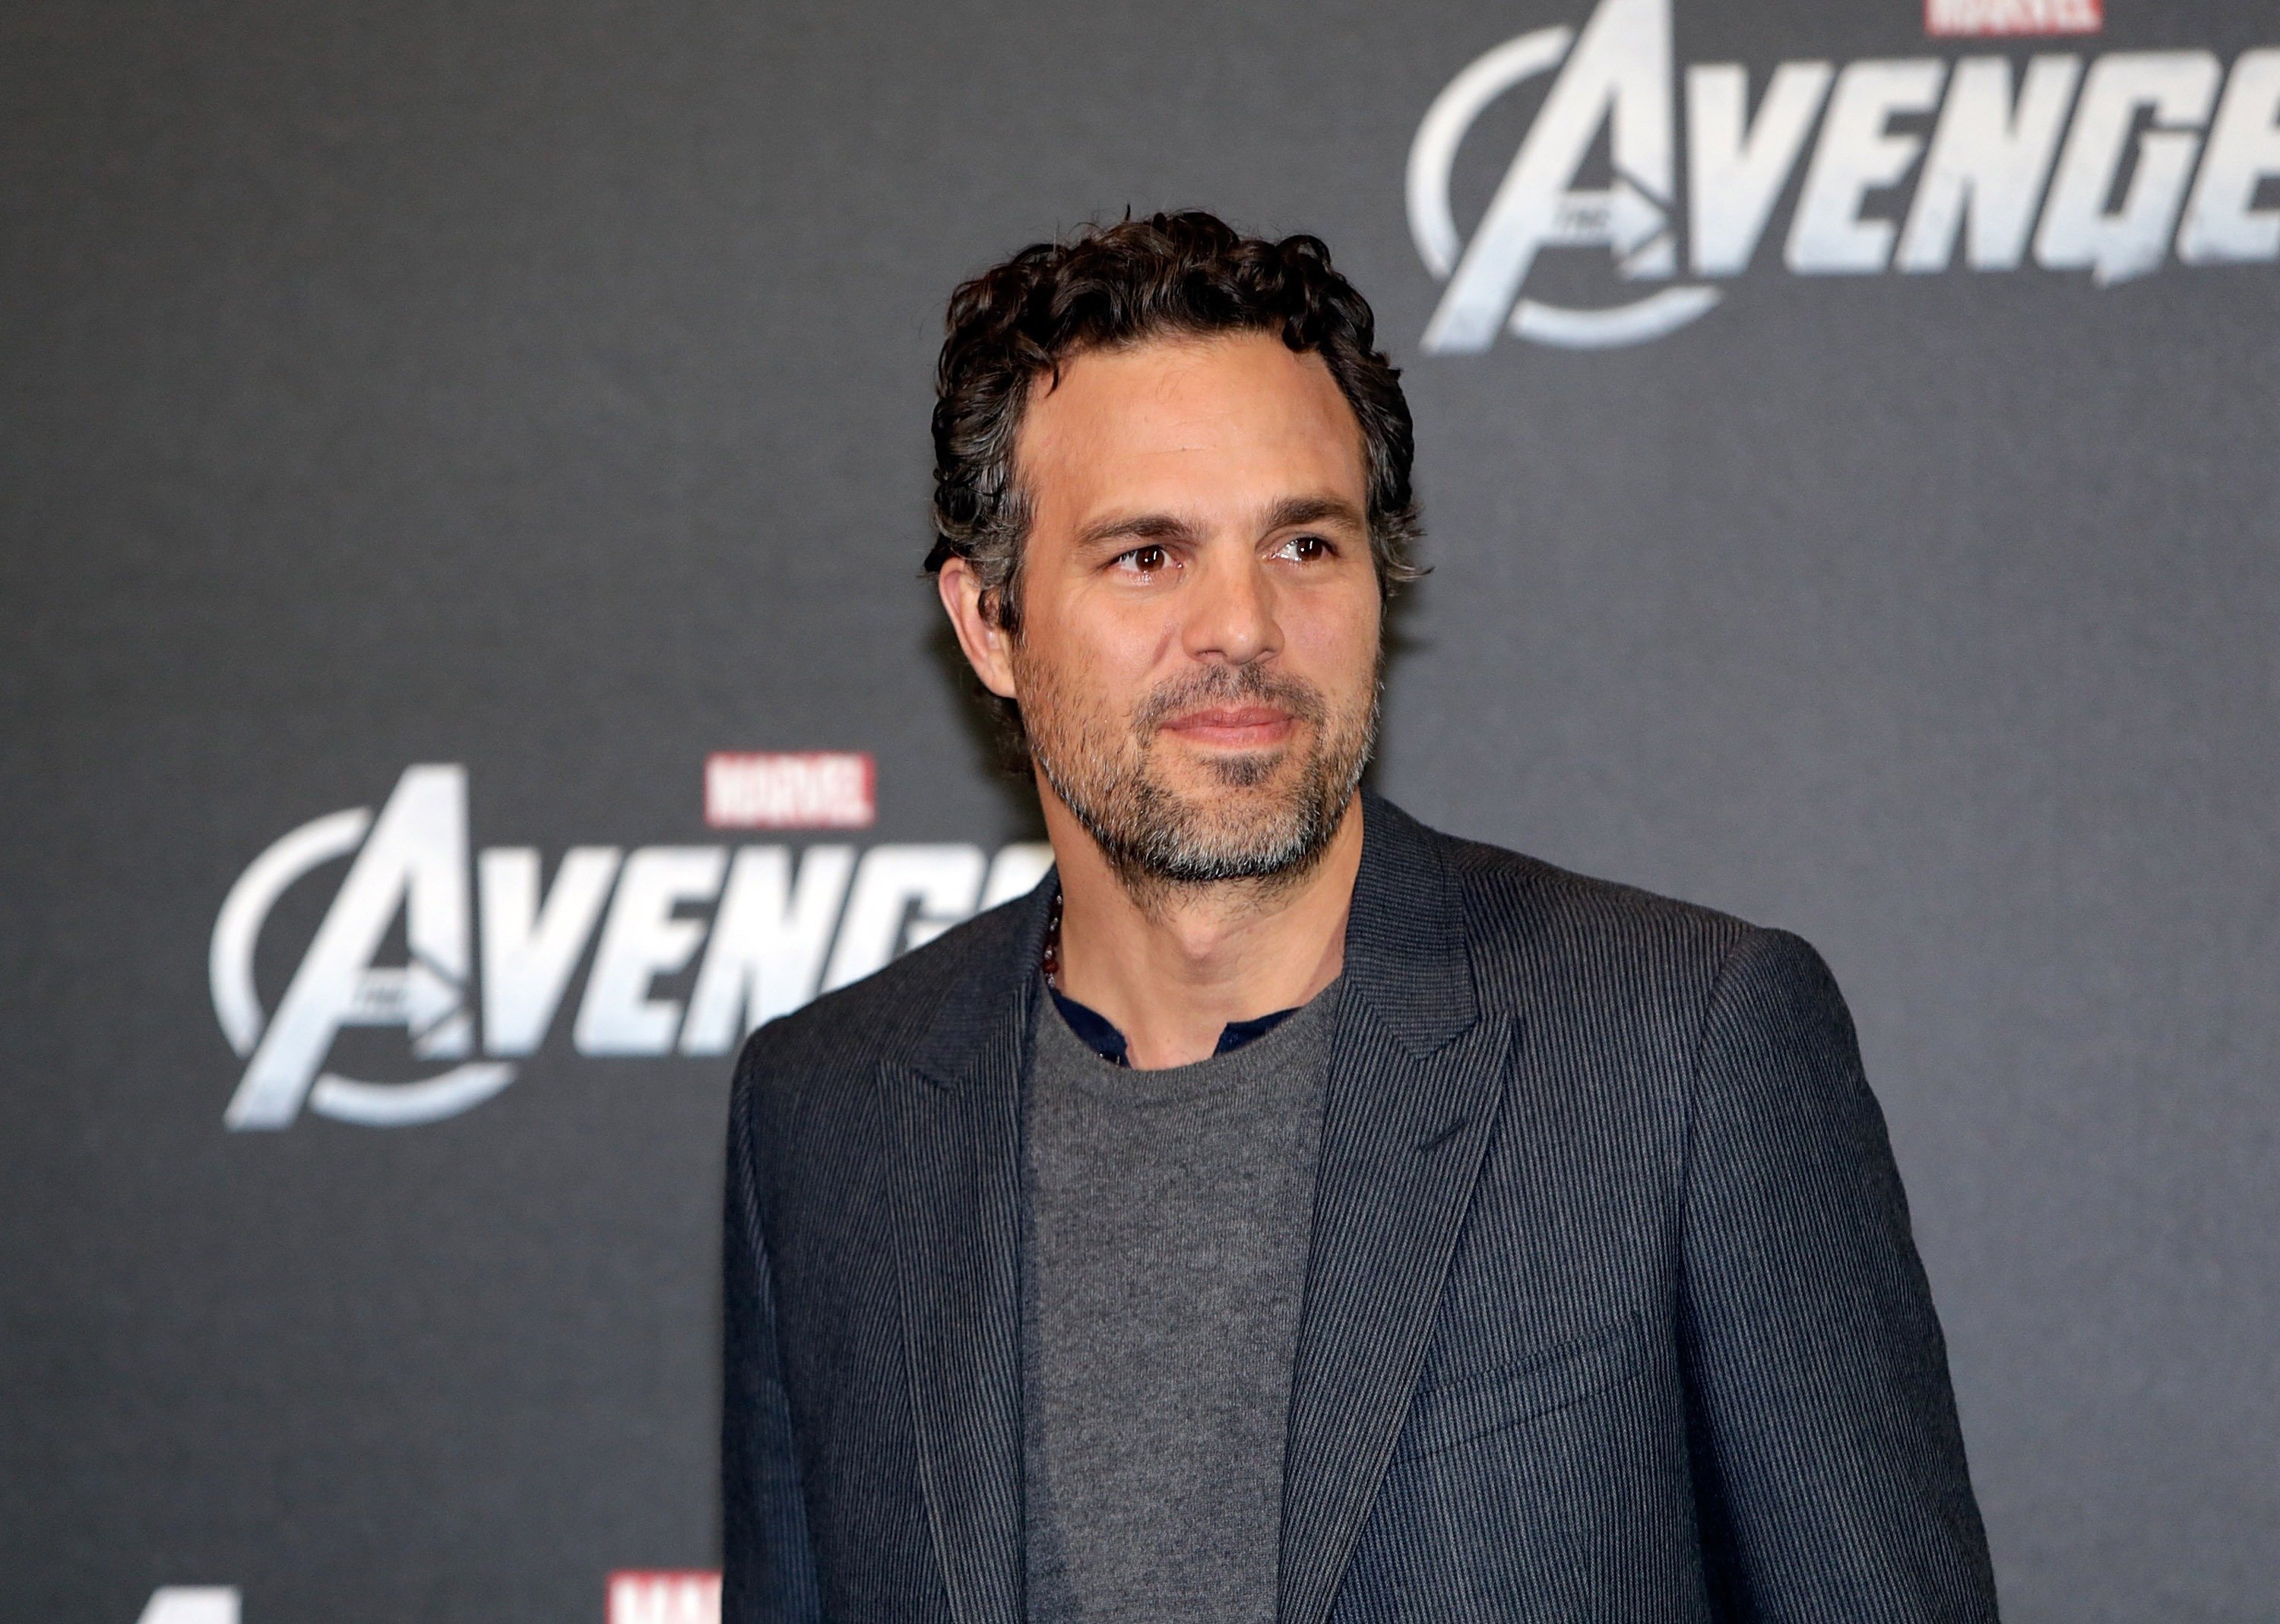 Mark Ruffalo at Ritz Carlton on April 23, 2012 in Berlin, Germany | Photo: Getty Images